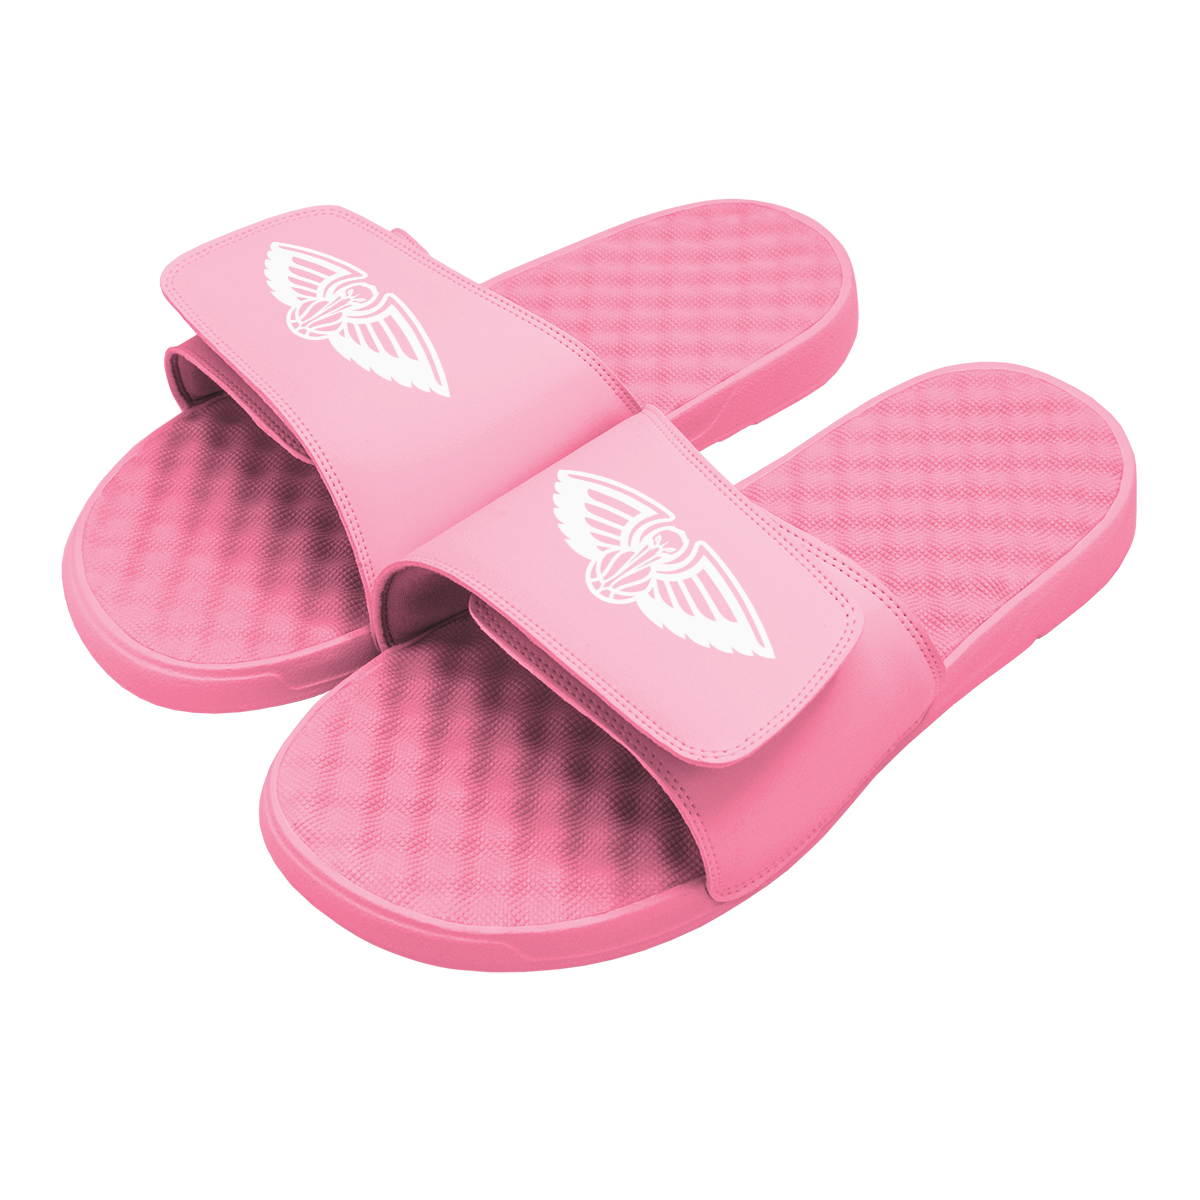 New Orleans Pelicans Primary Pink Slides